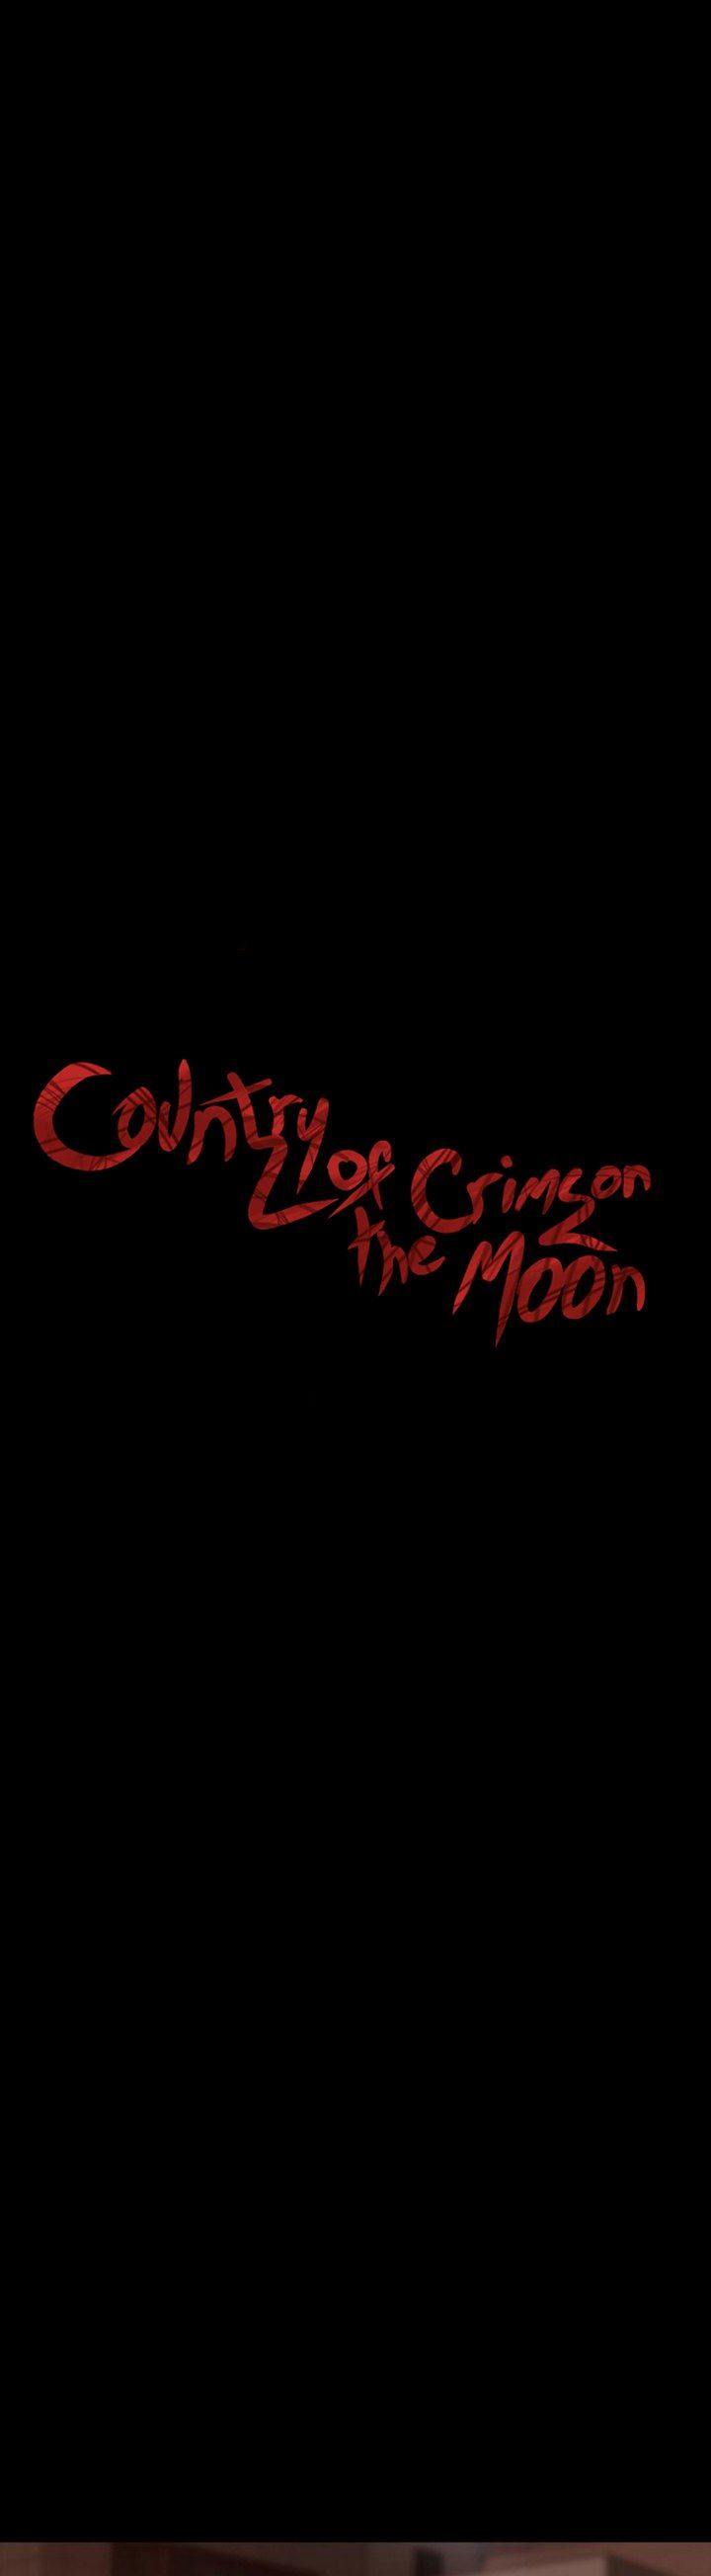 Country of The Crimson Moon Chapter 6.1